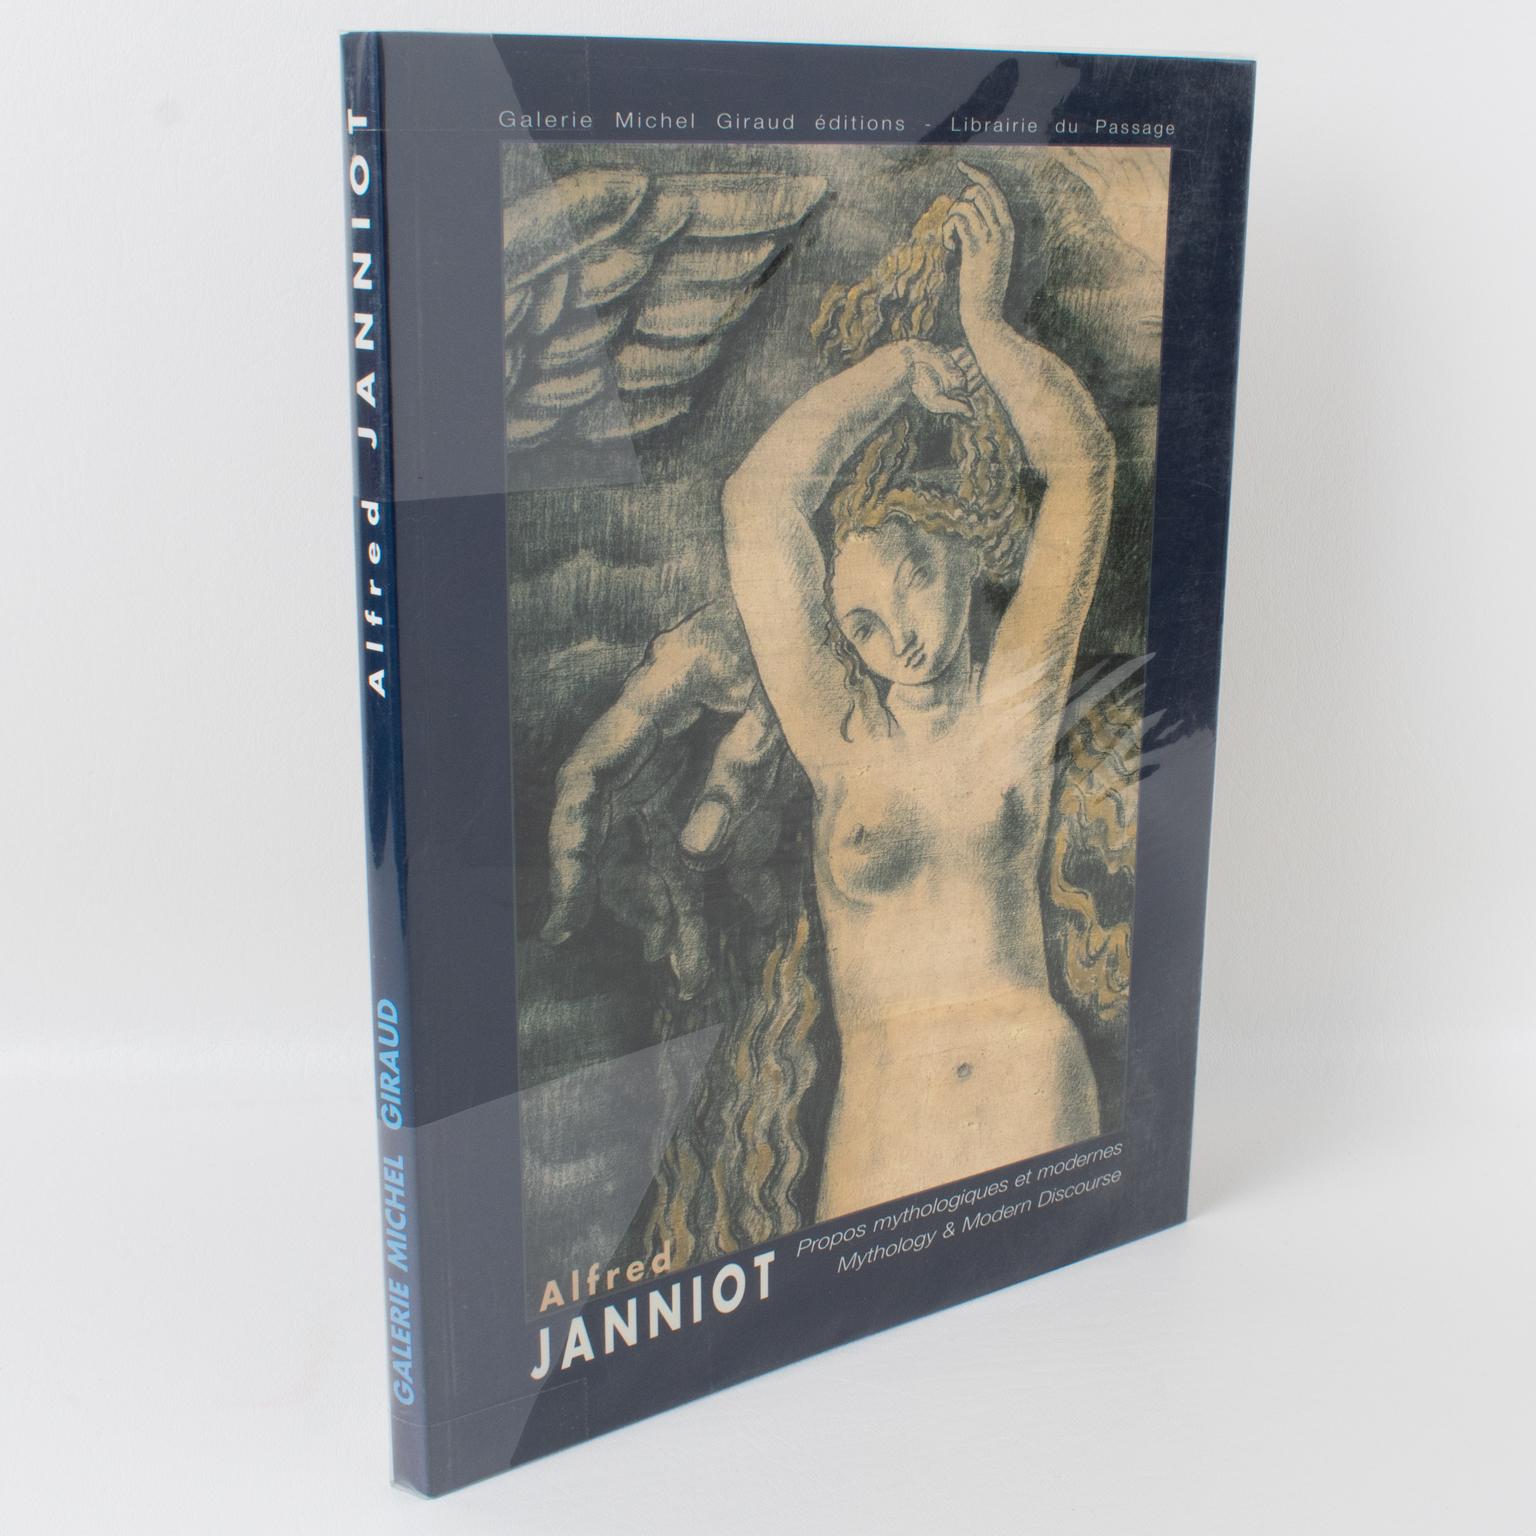 Alfred Janniot, Propos Mythologiques et Modernes (Alfred Janniot, Mythology and Modern Discourse), French-English Book by Michel Giraud, 2006.
This monographic soft cover catalog of an exhibition held at Galerie Michel Giraud in 2006 retraces the